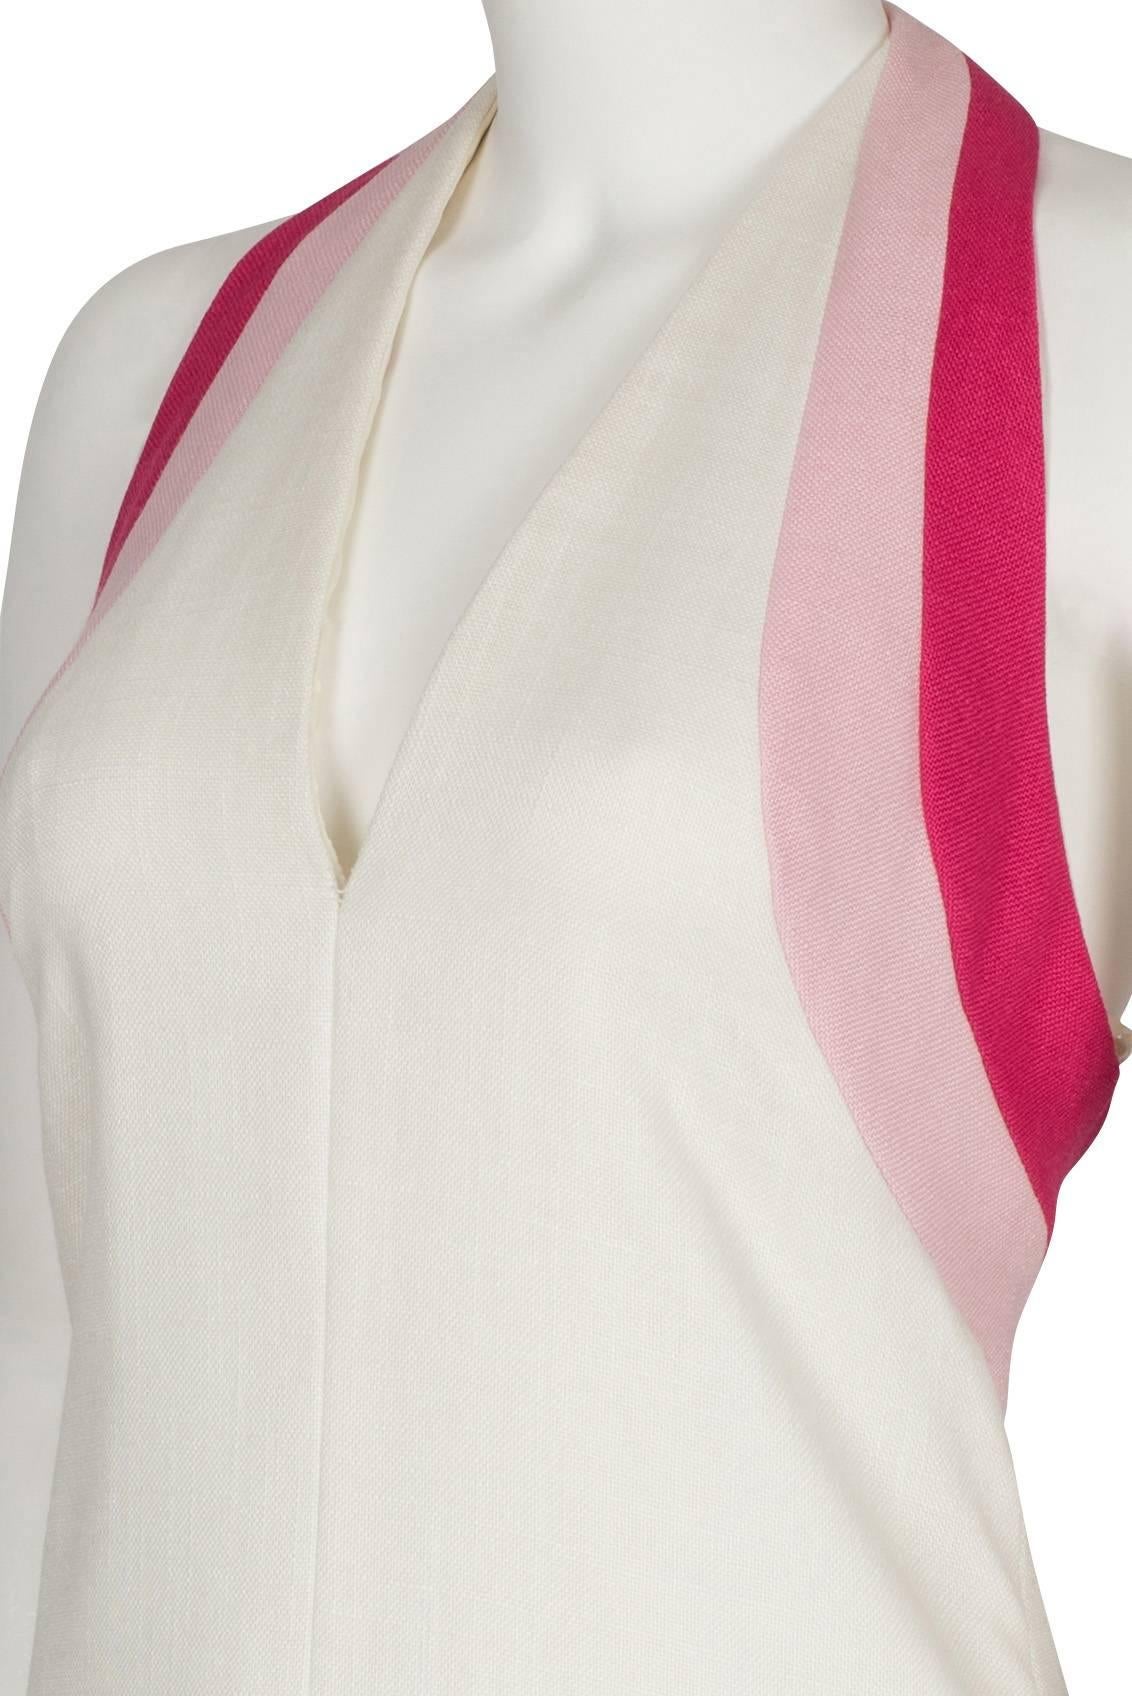 1970's Lord & Taylor White Linen with Pink Halter Gown 2